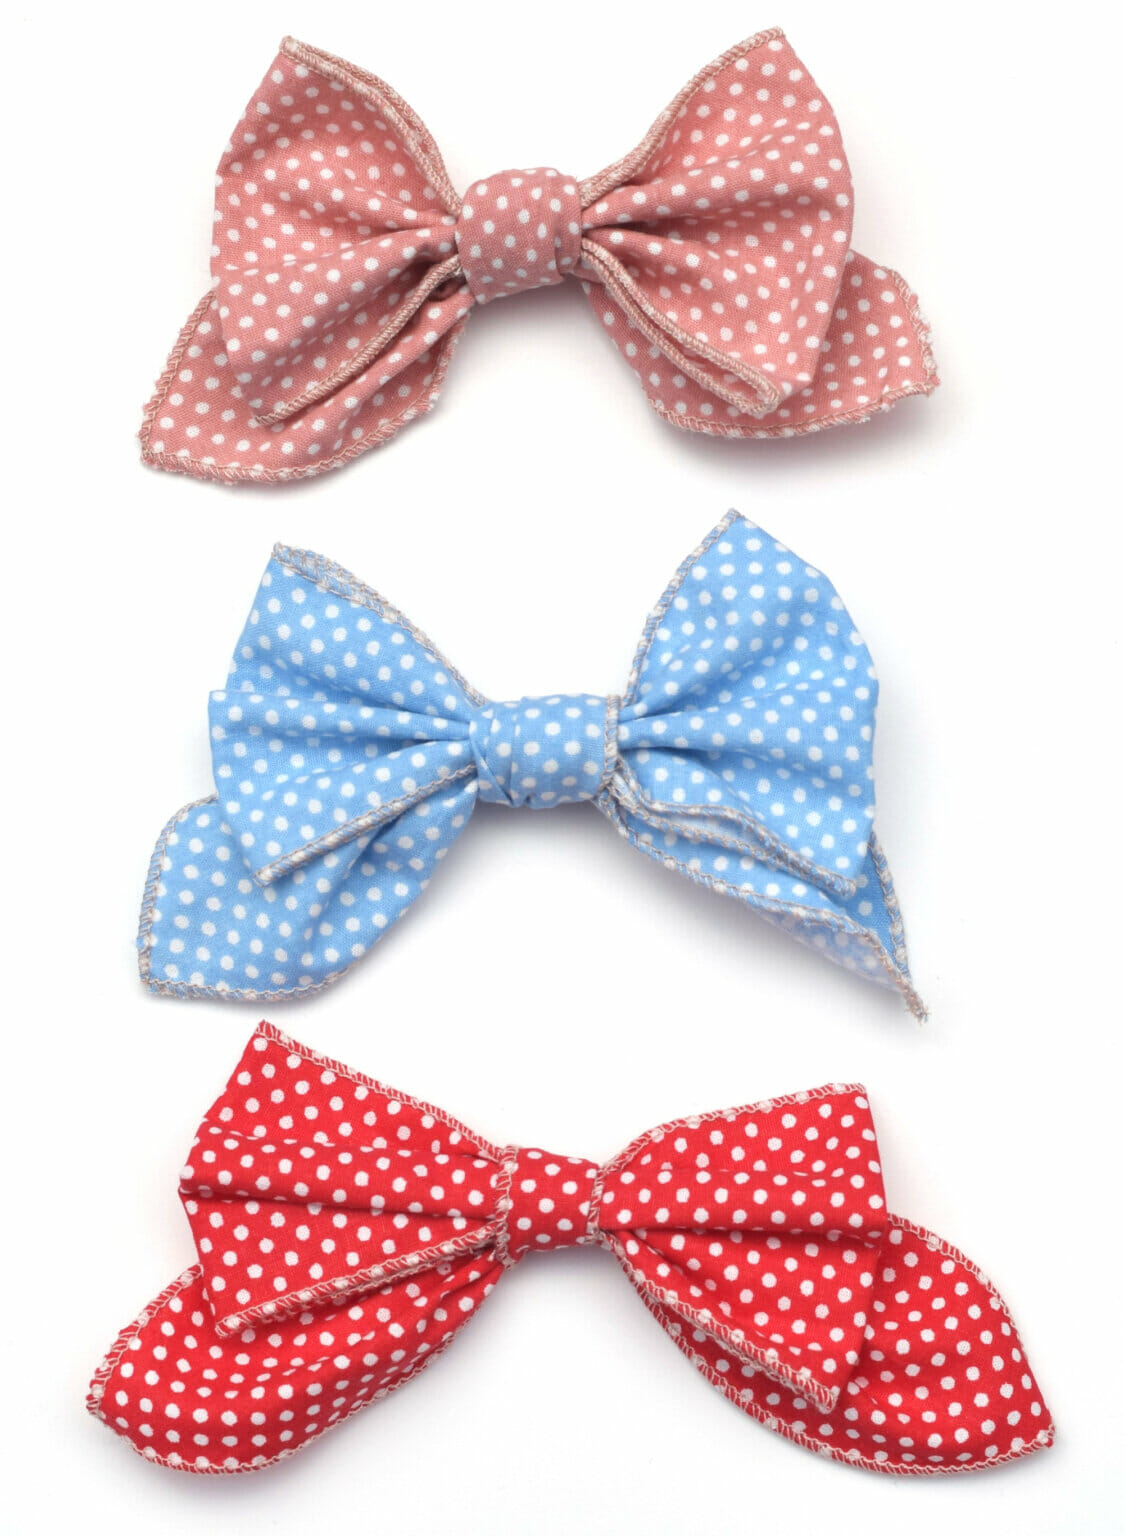 How to make fabric bows tutorial - I Can Sew This